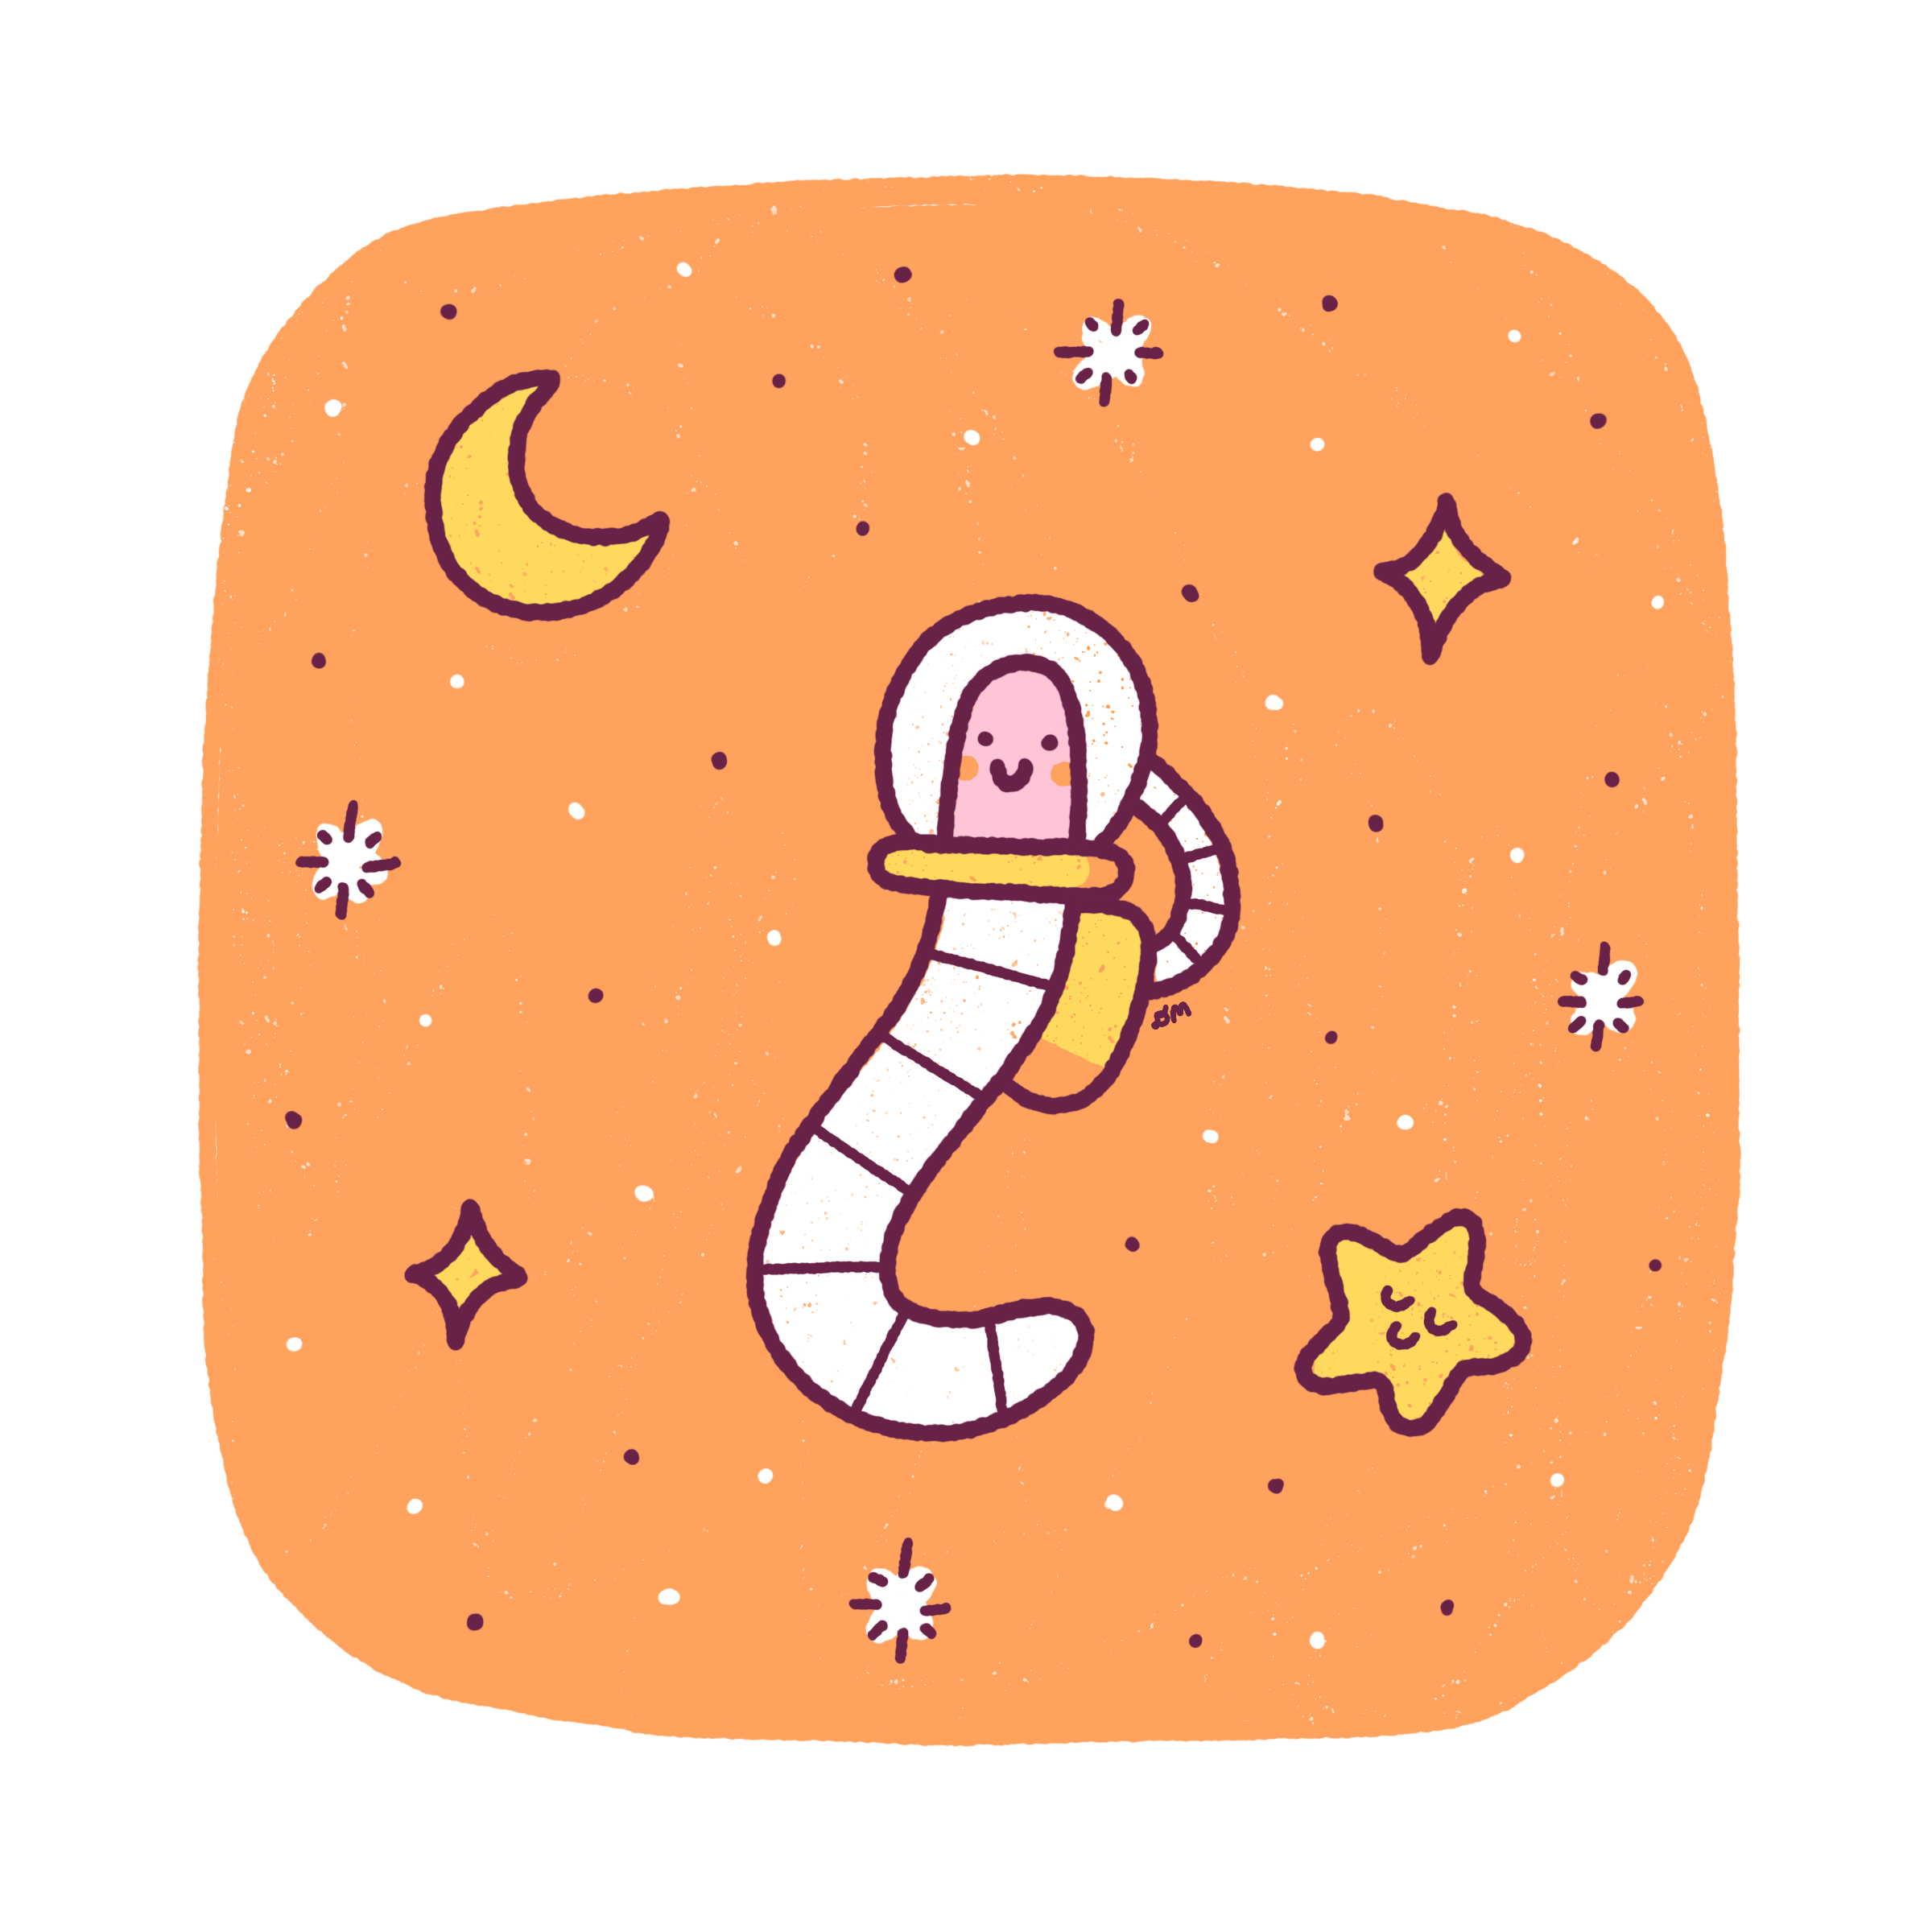 Space Worm